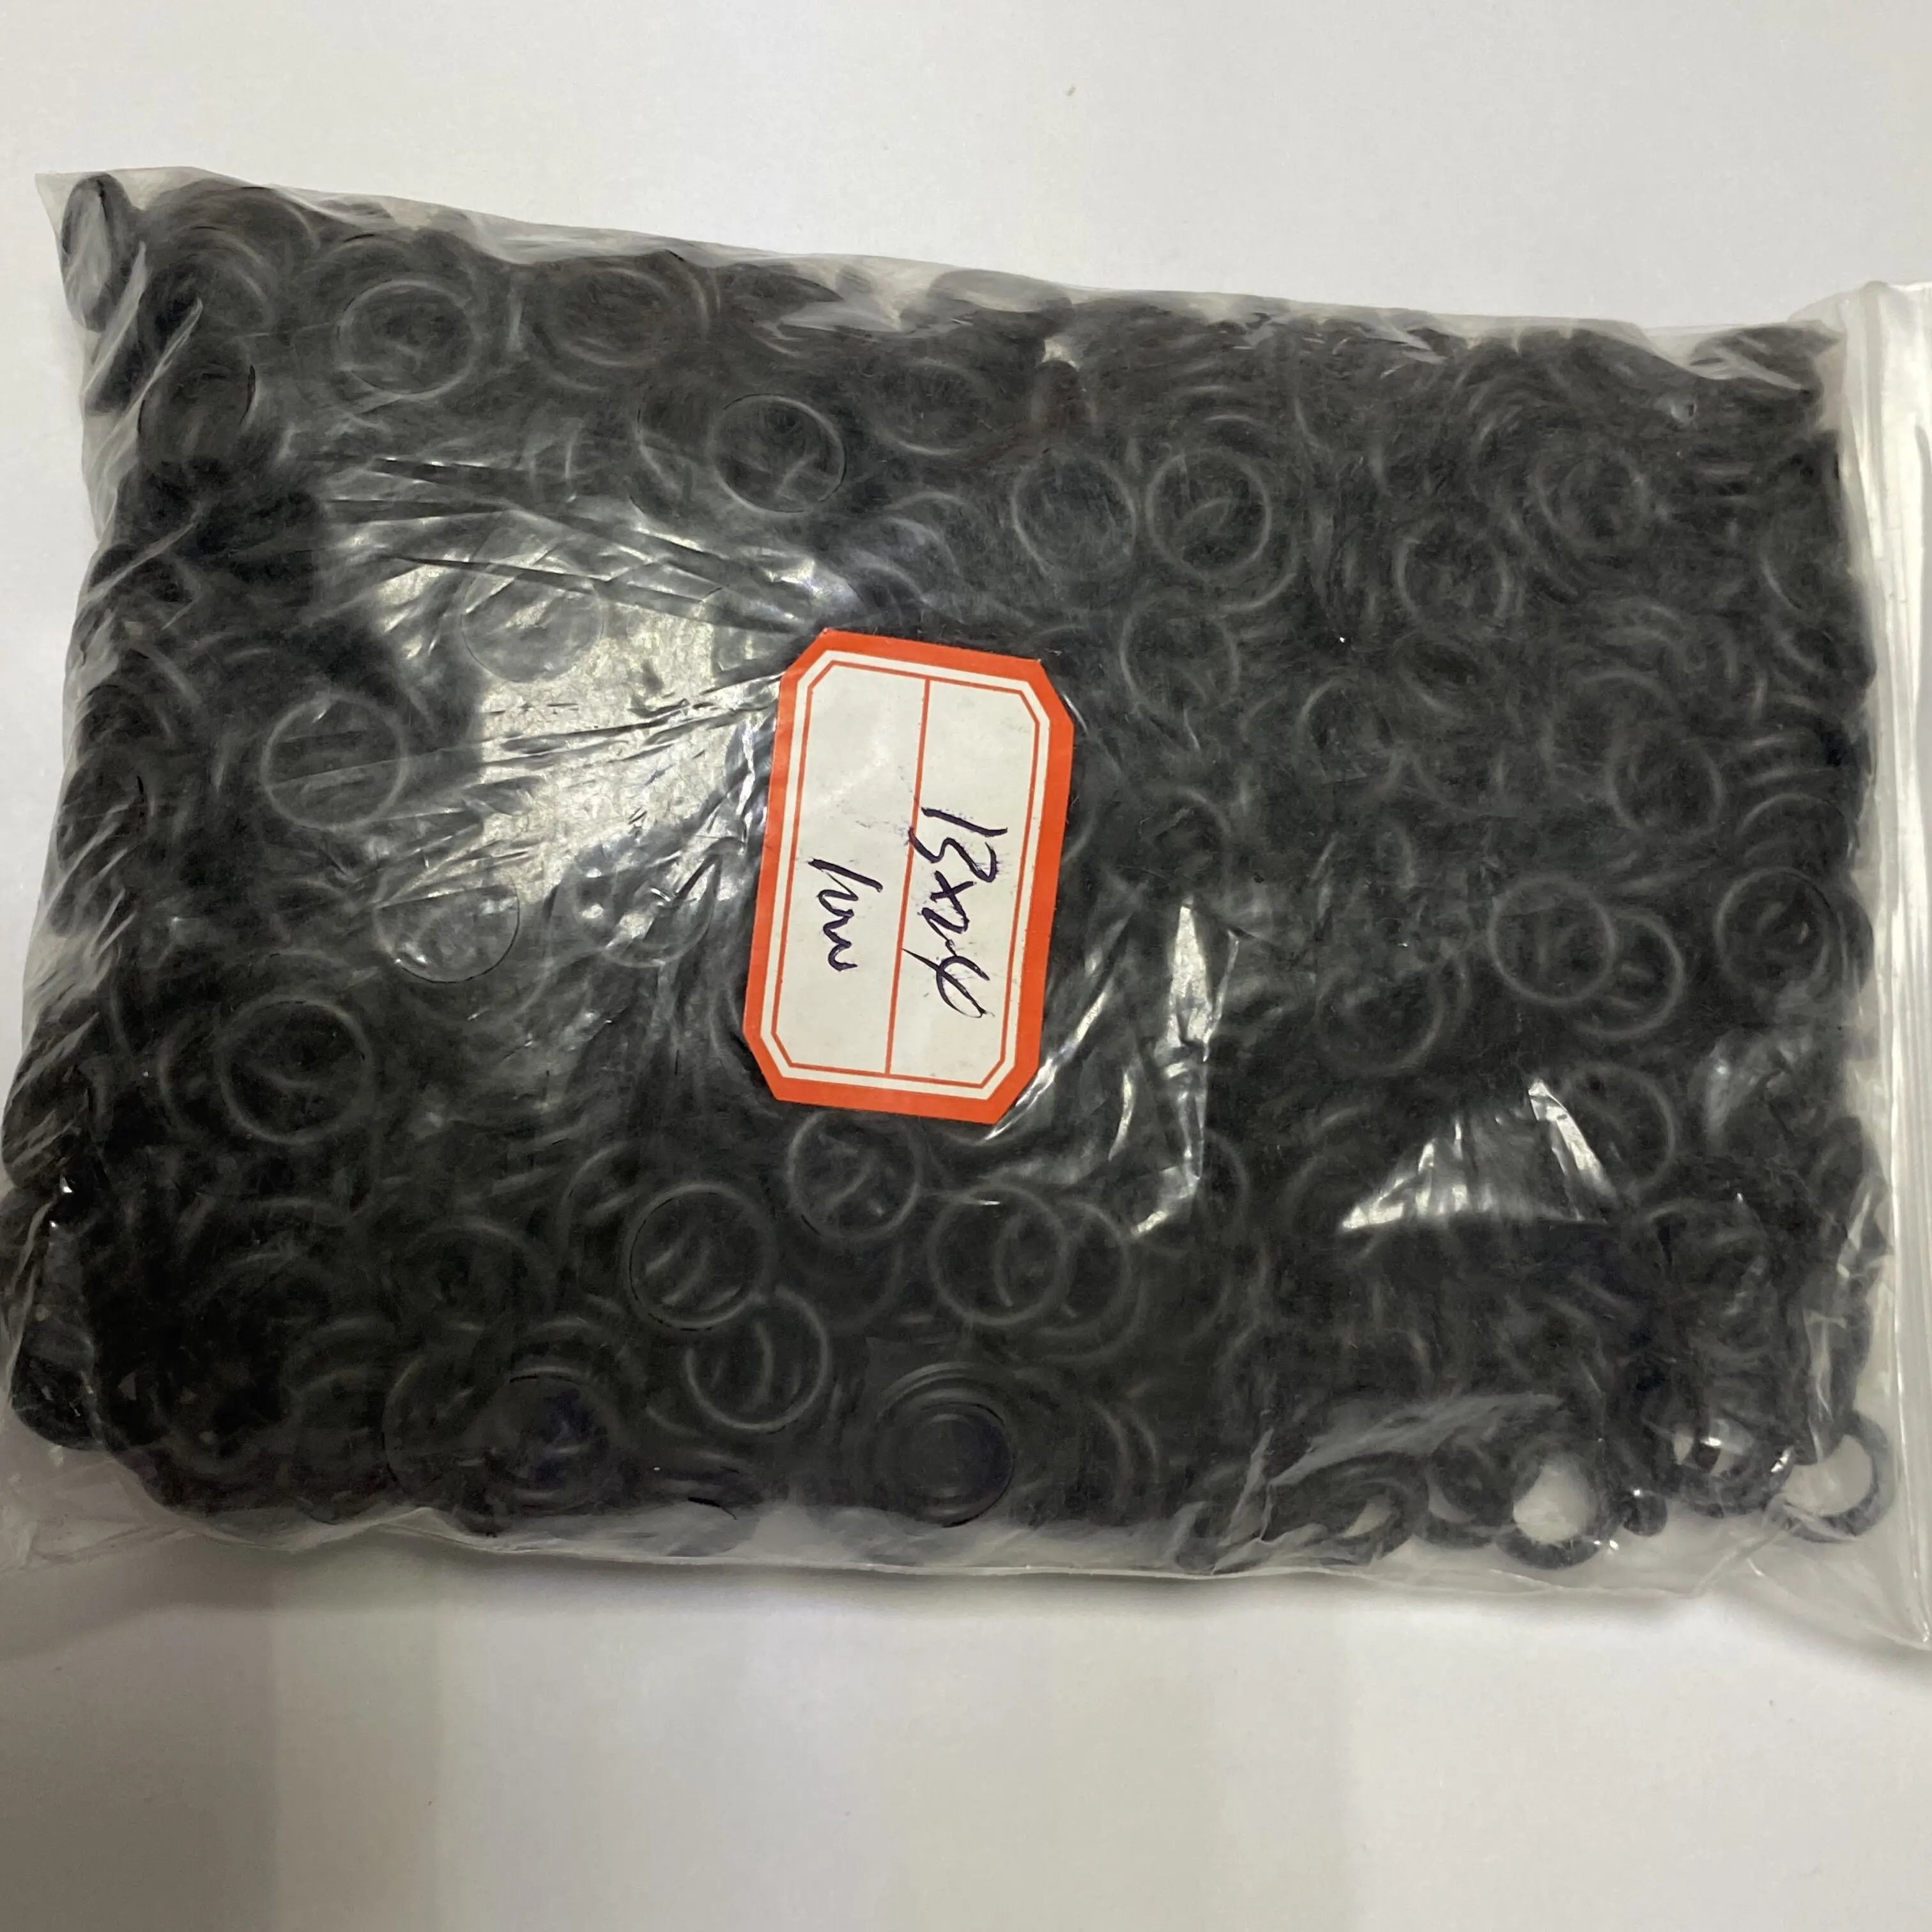 Lot1000pcs O-RINGS Bands For GI Joe Cobra Action Figure Replacement Accessories